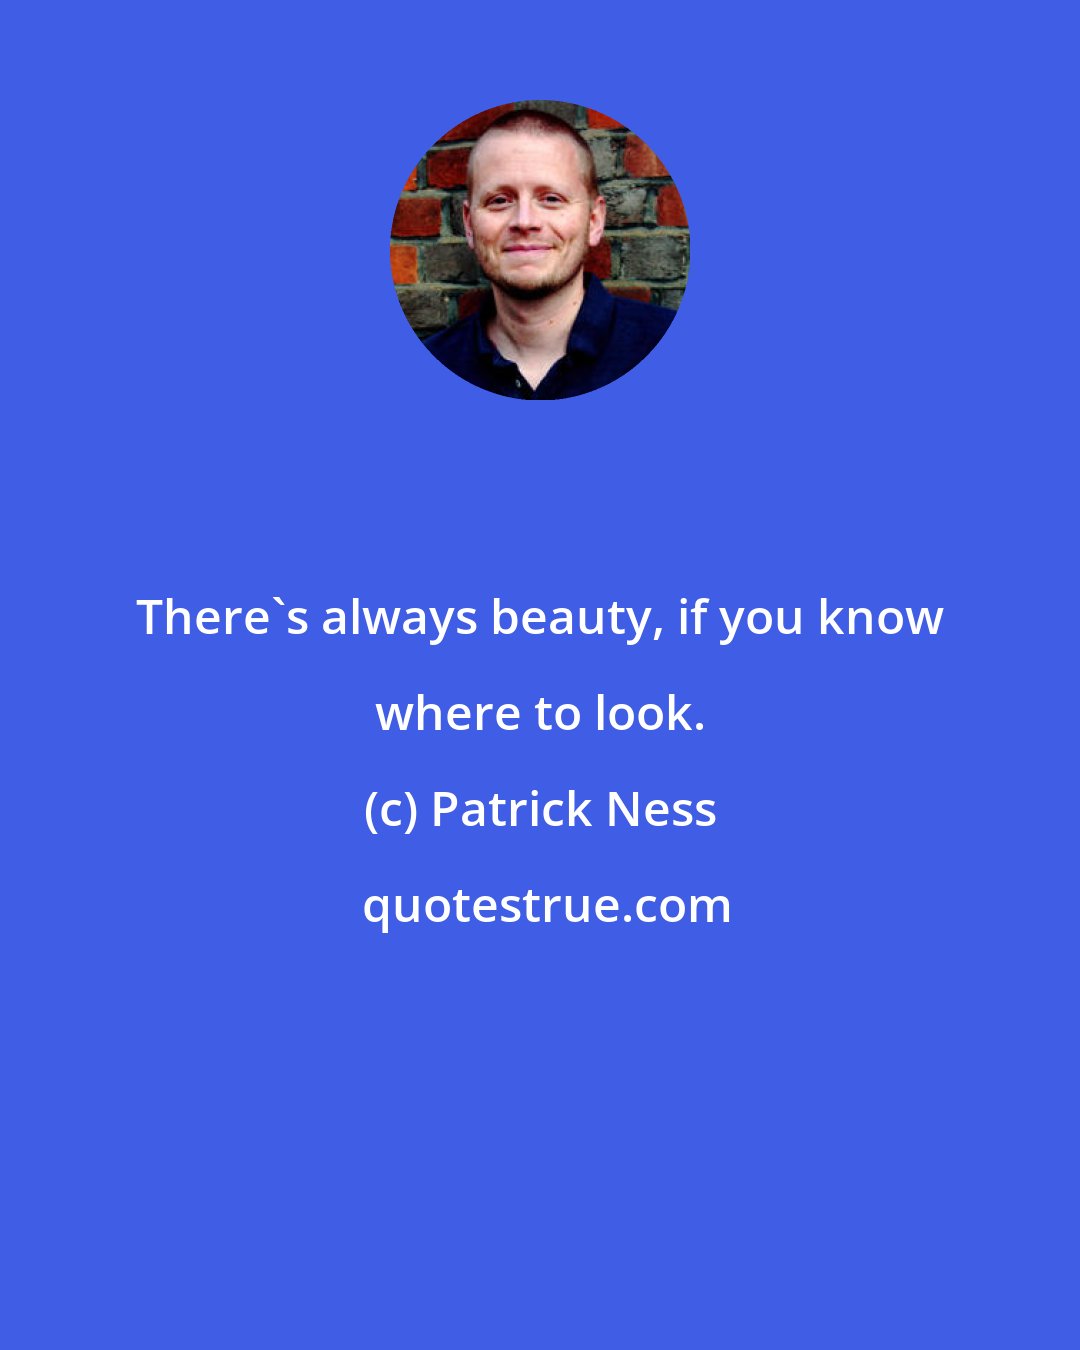 Patrick Ness: There's always beauty, if you know where to look.